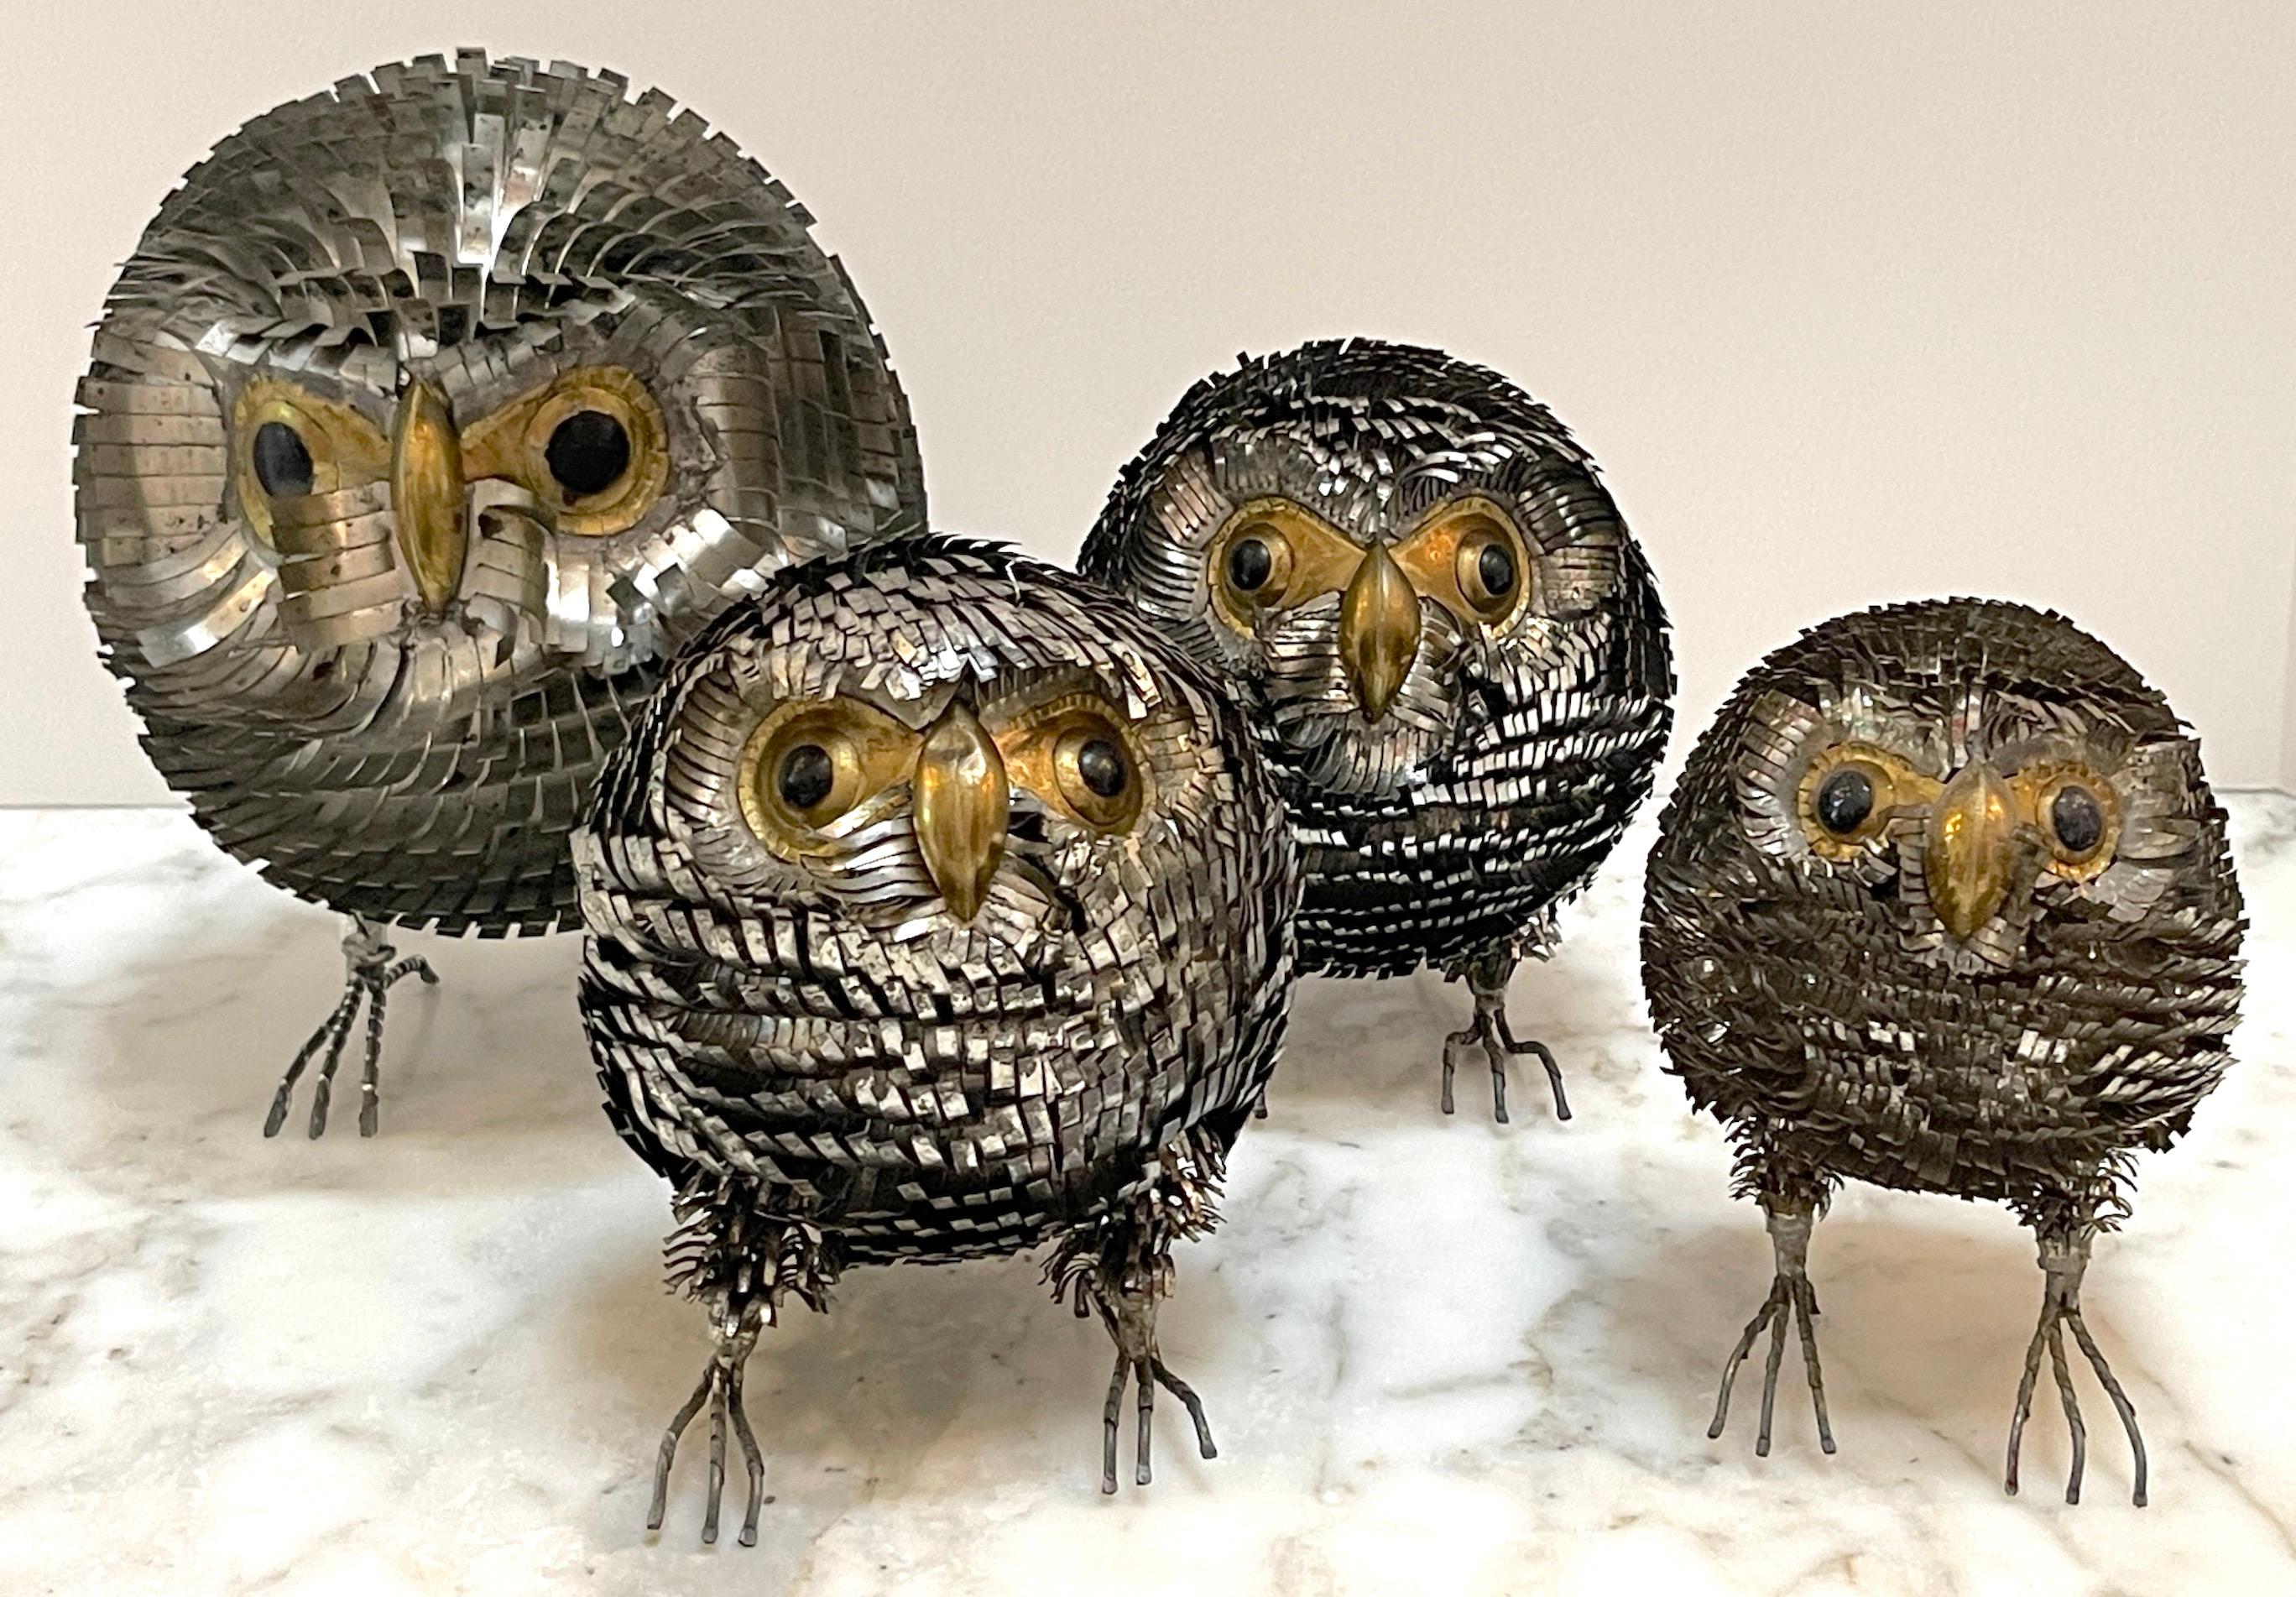 Collection of 4 Brutalist Metal Work Figures of Owls, Attributed  Sergio Bustamante
Mexico, 1970s

We are please to offer an instant collection of four graduating sized brutalist sculptures of owls, attributed to the renowned Mexican artist Sergio